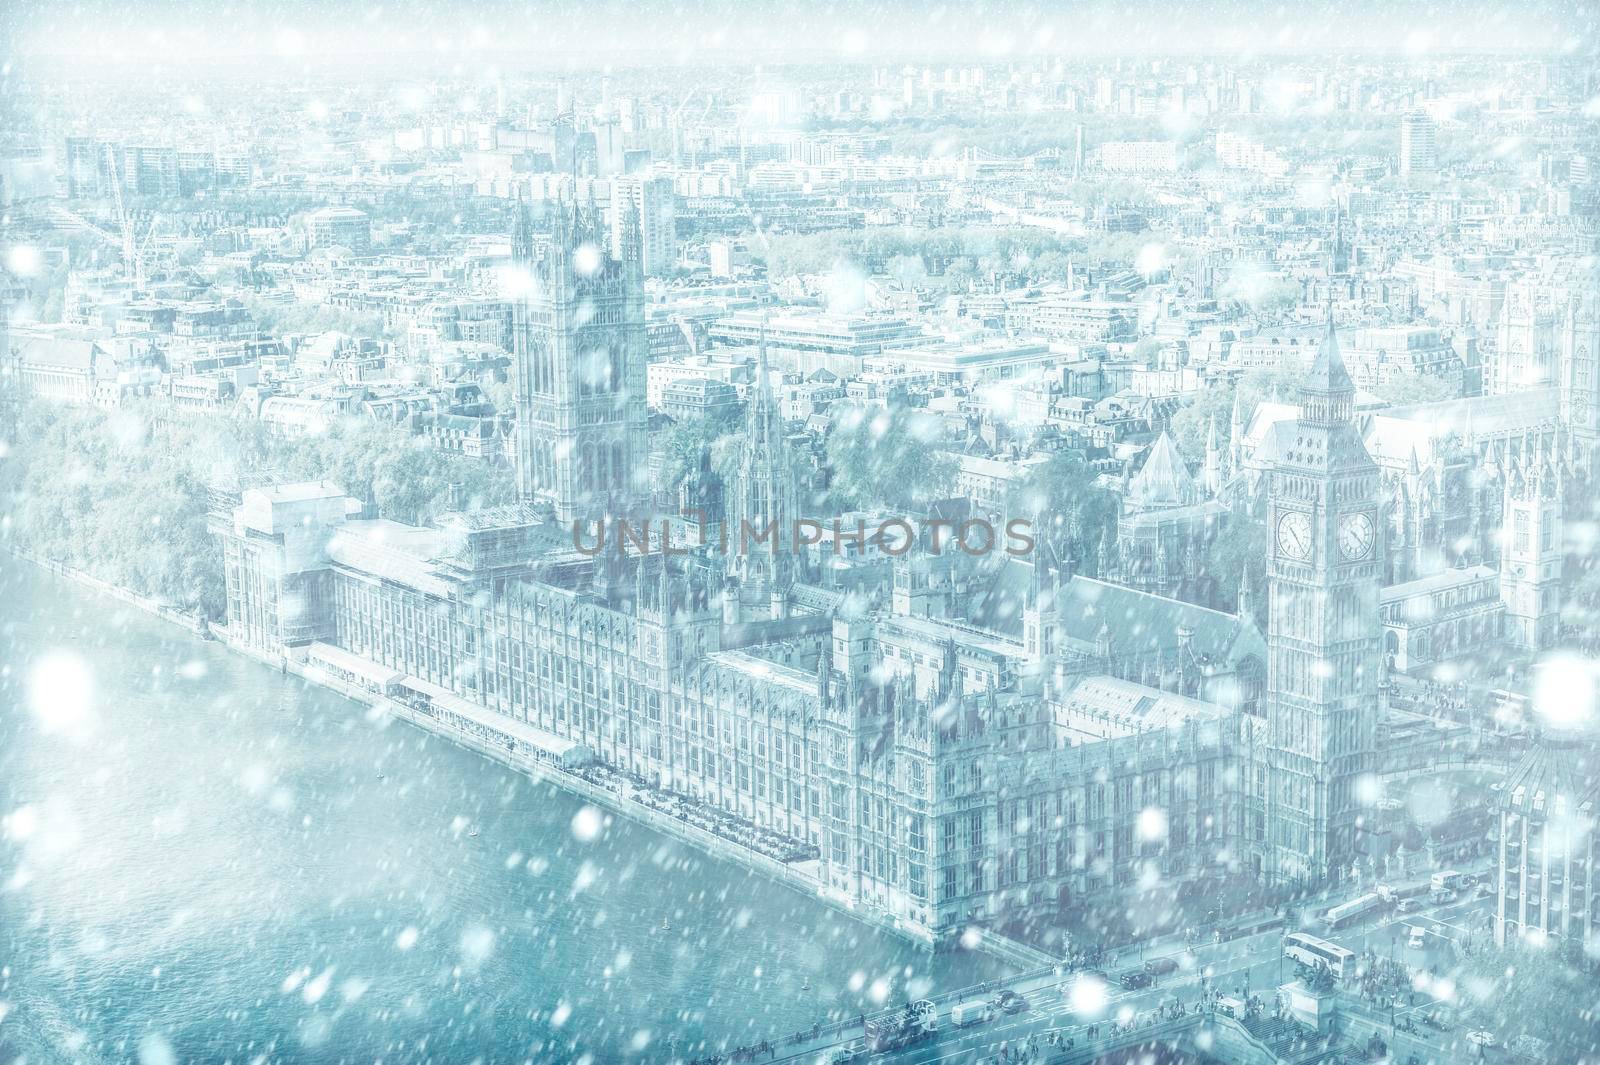 View of House of Parliament with Thames river in London with snow